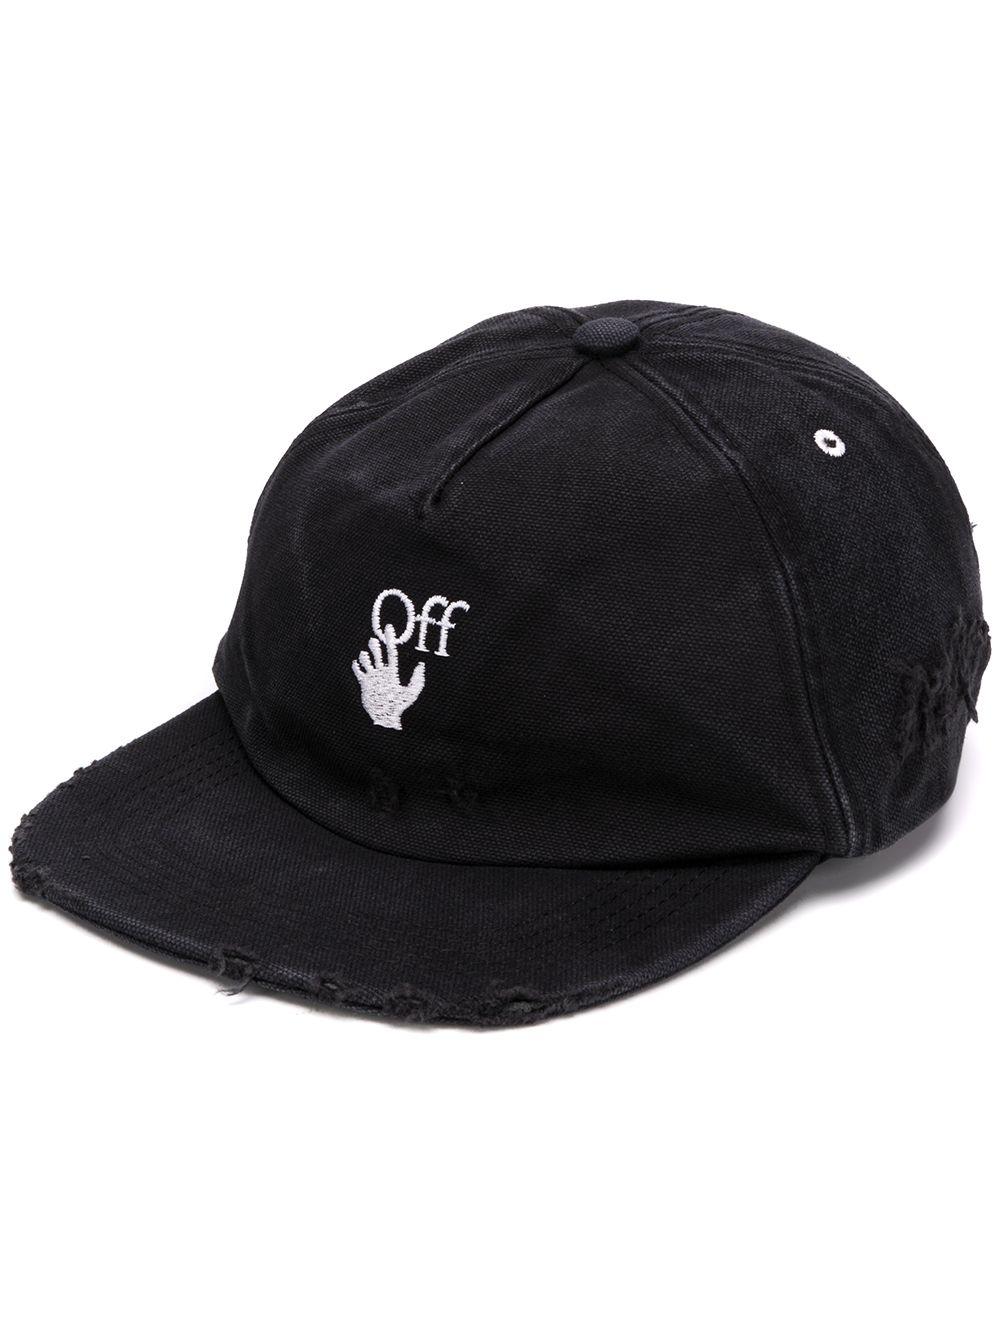 Off-White c/o Virgil Abloh Distressed Embroidered Cap in Black | Lyst